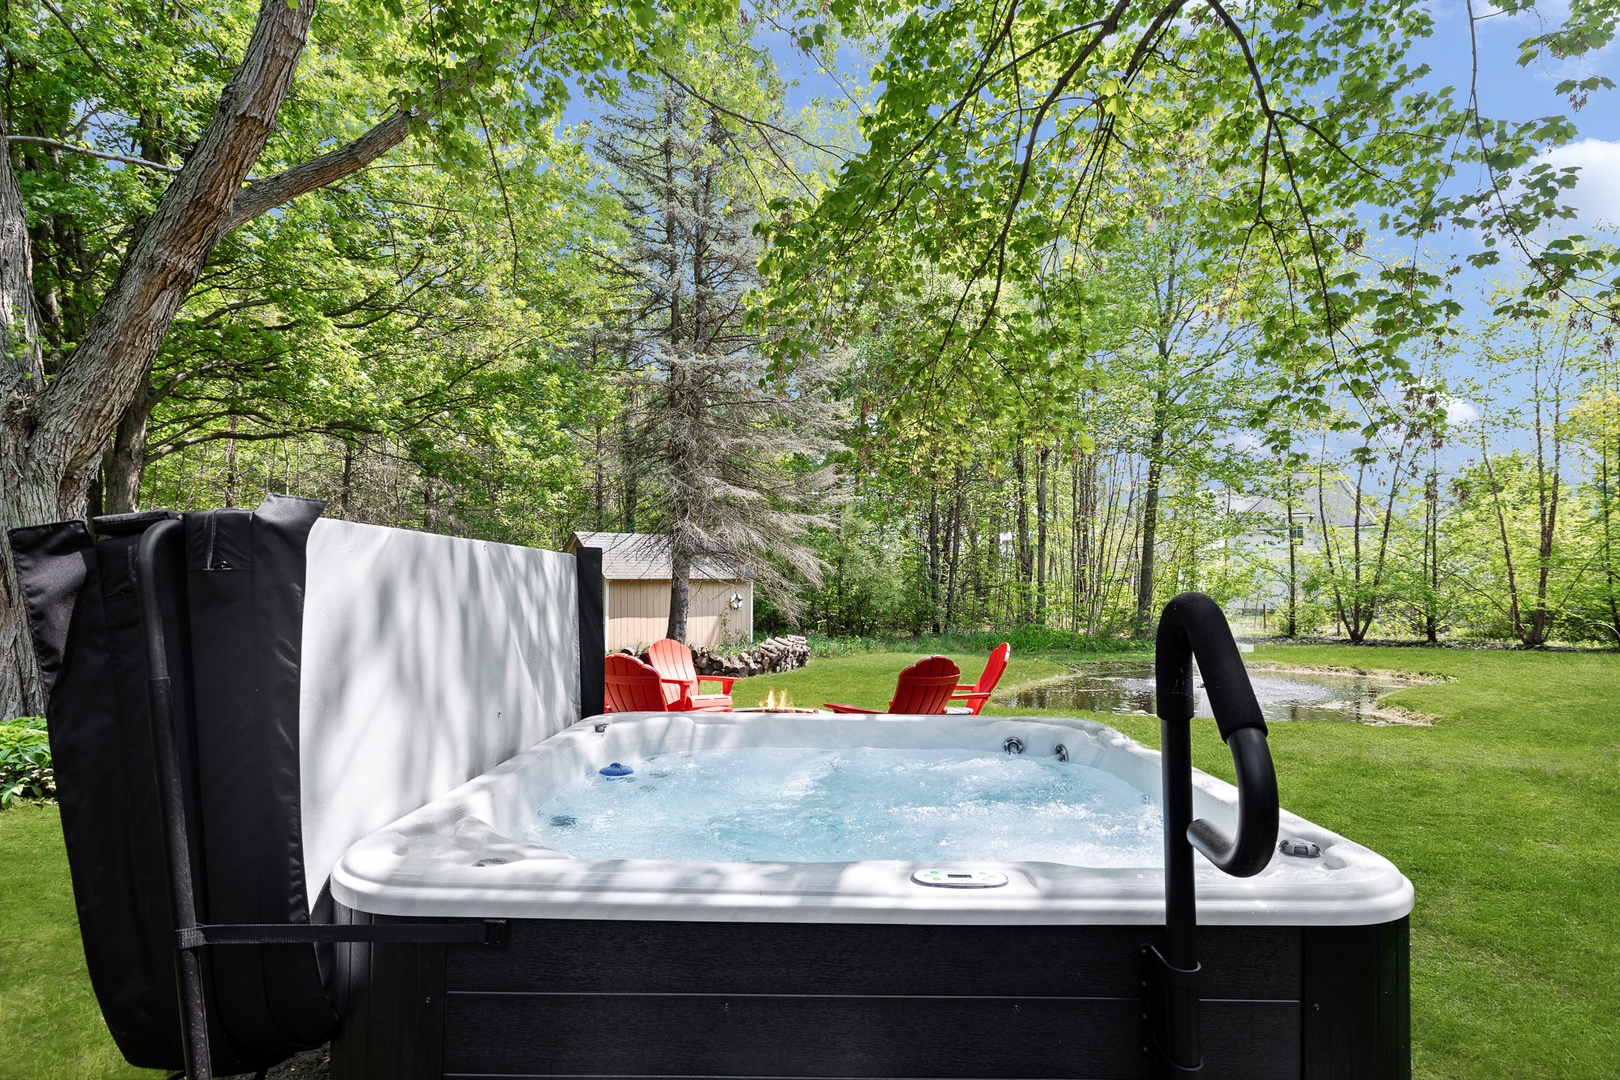 Soak your cares away in our hot tub overlooking the Lilypad pond.